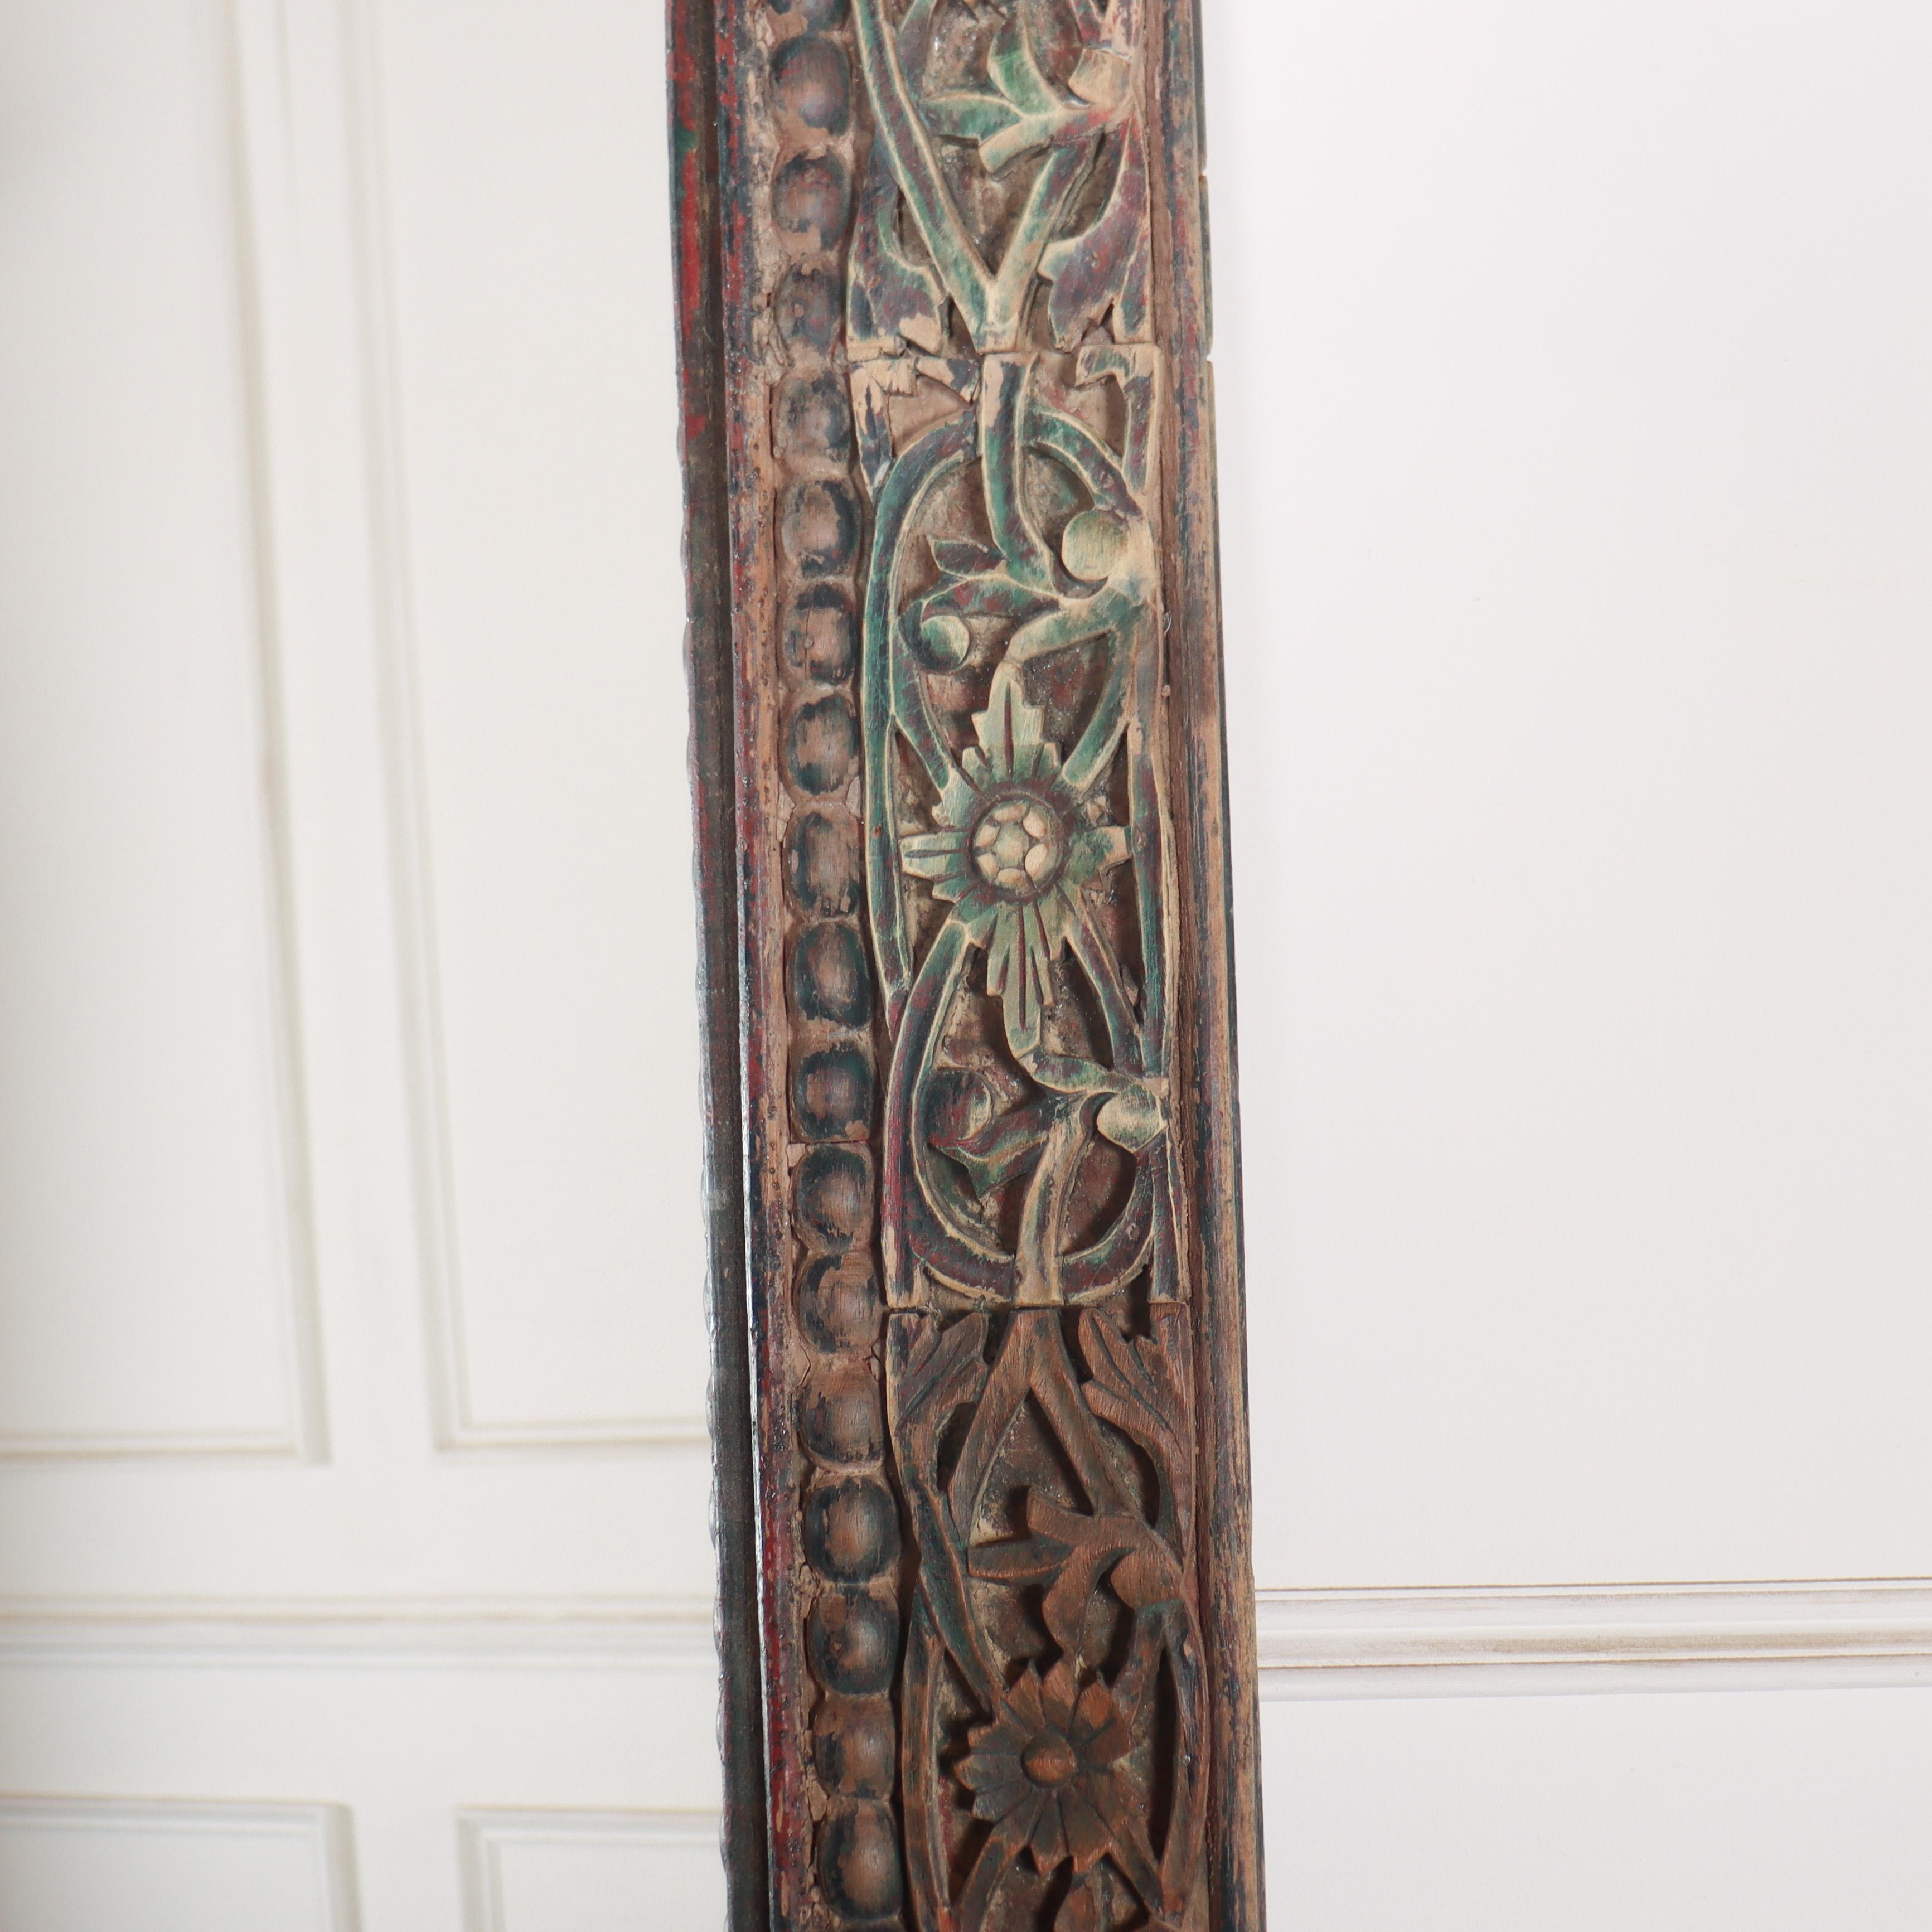 Large Painted Fretwork Mirror In Good Condition For Sale In Leamington Spa, Warwickshire